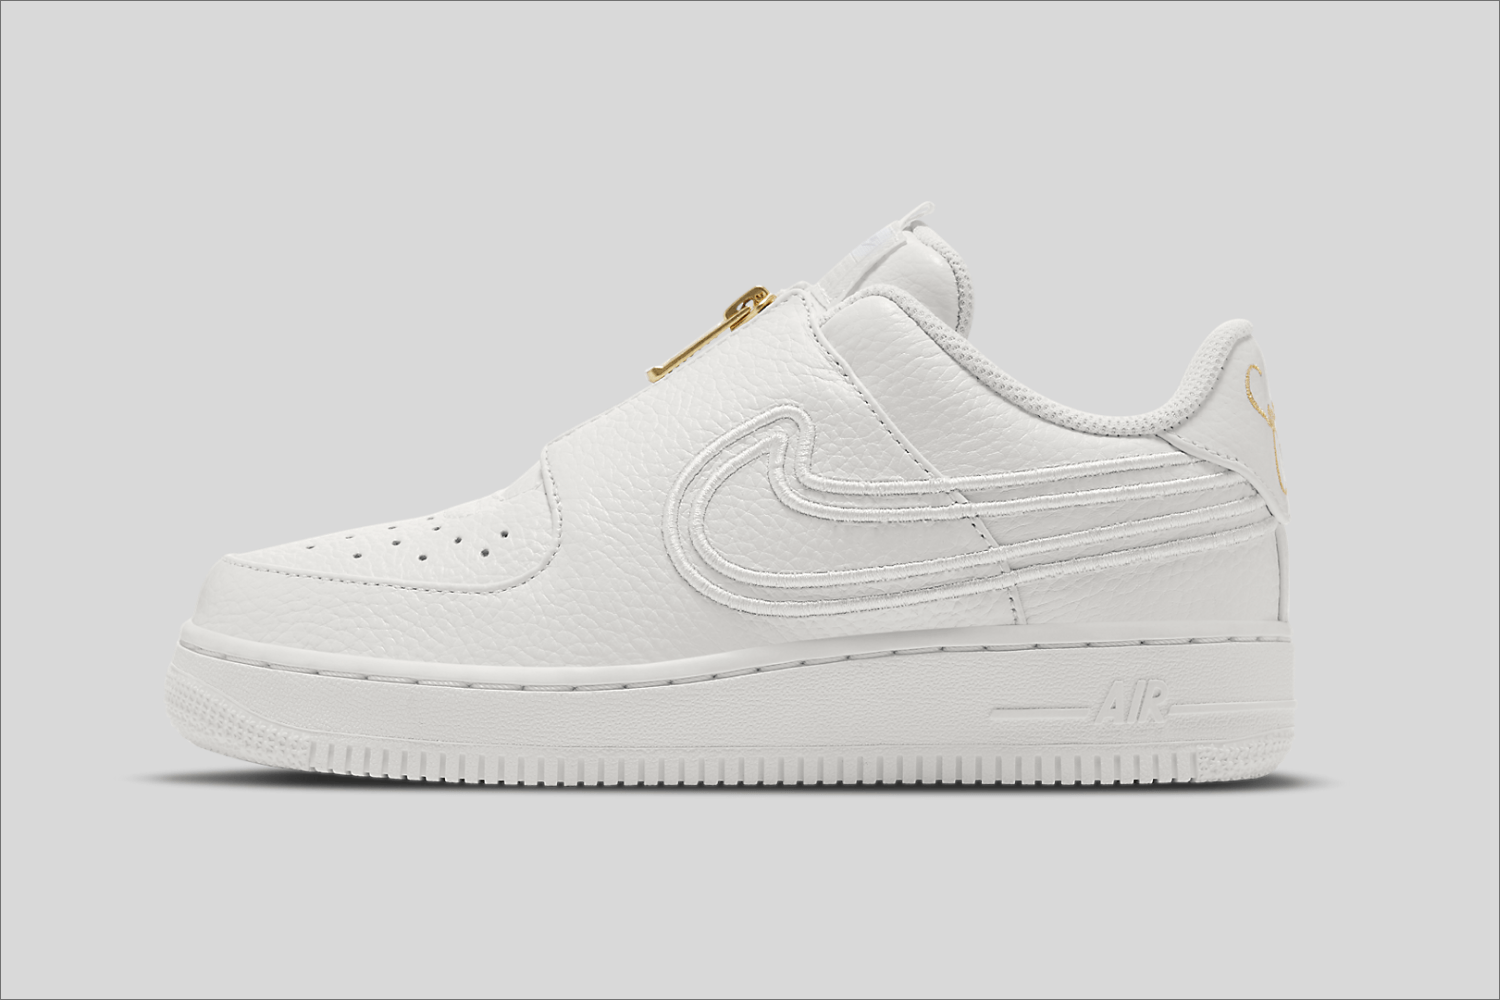 The Serena Williams x Nike Air Force 1 in 'Summit White'